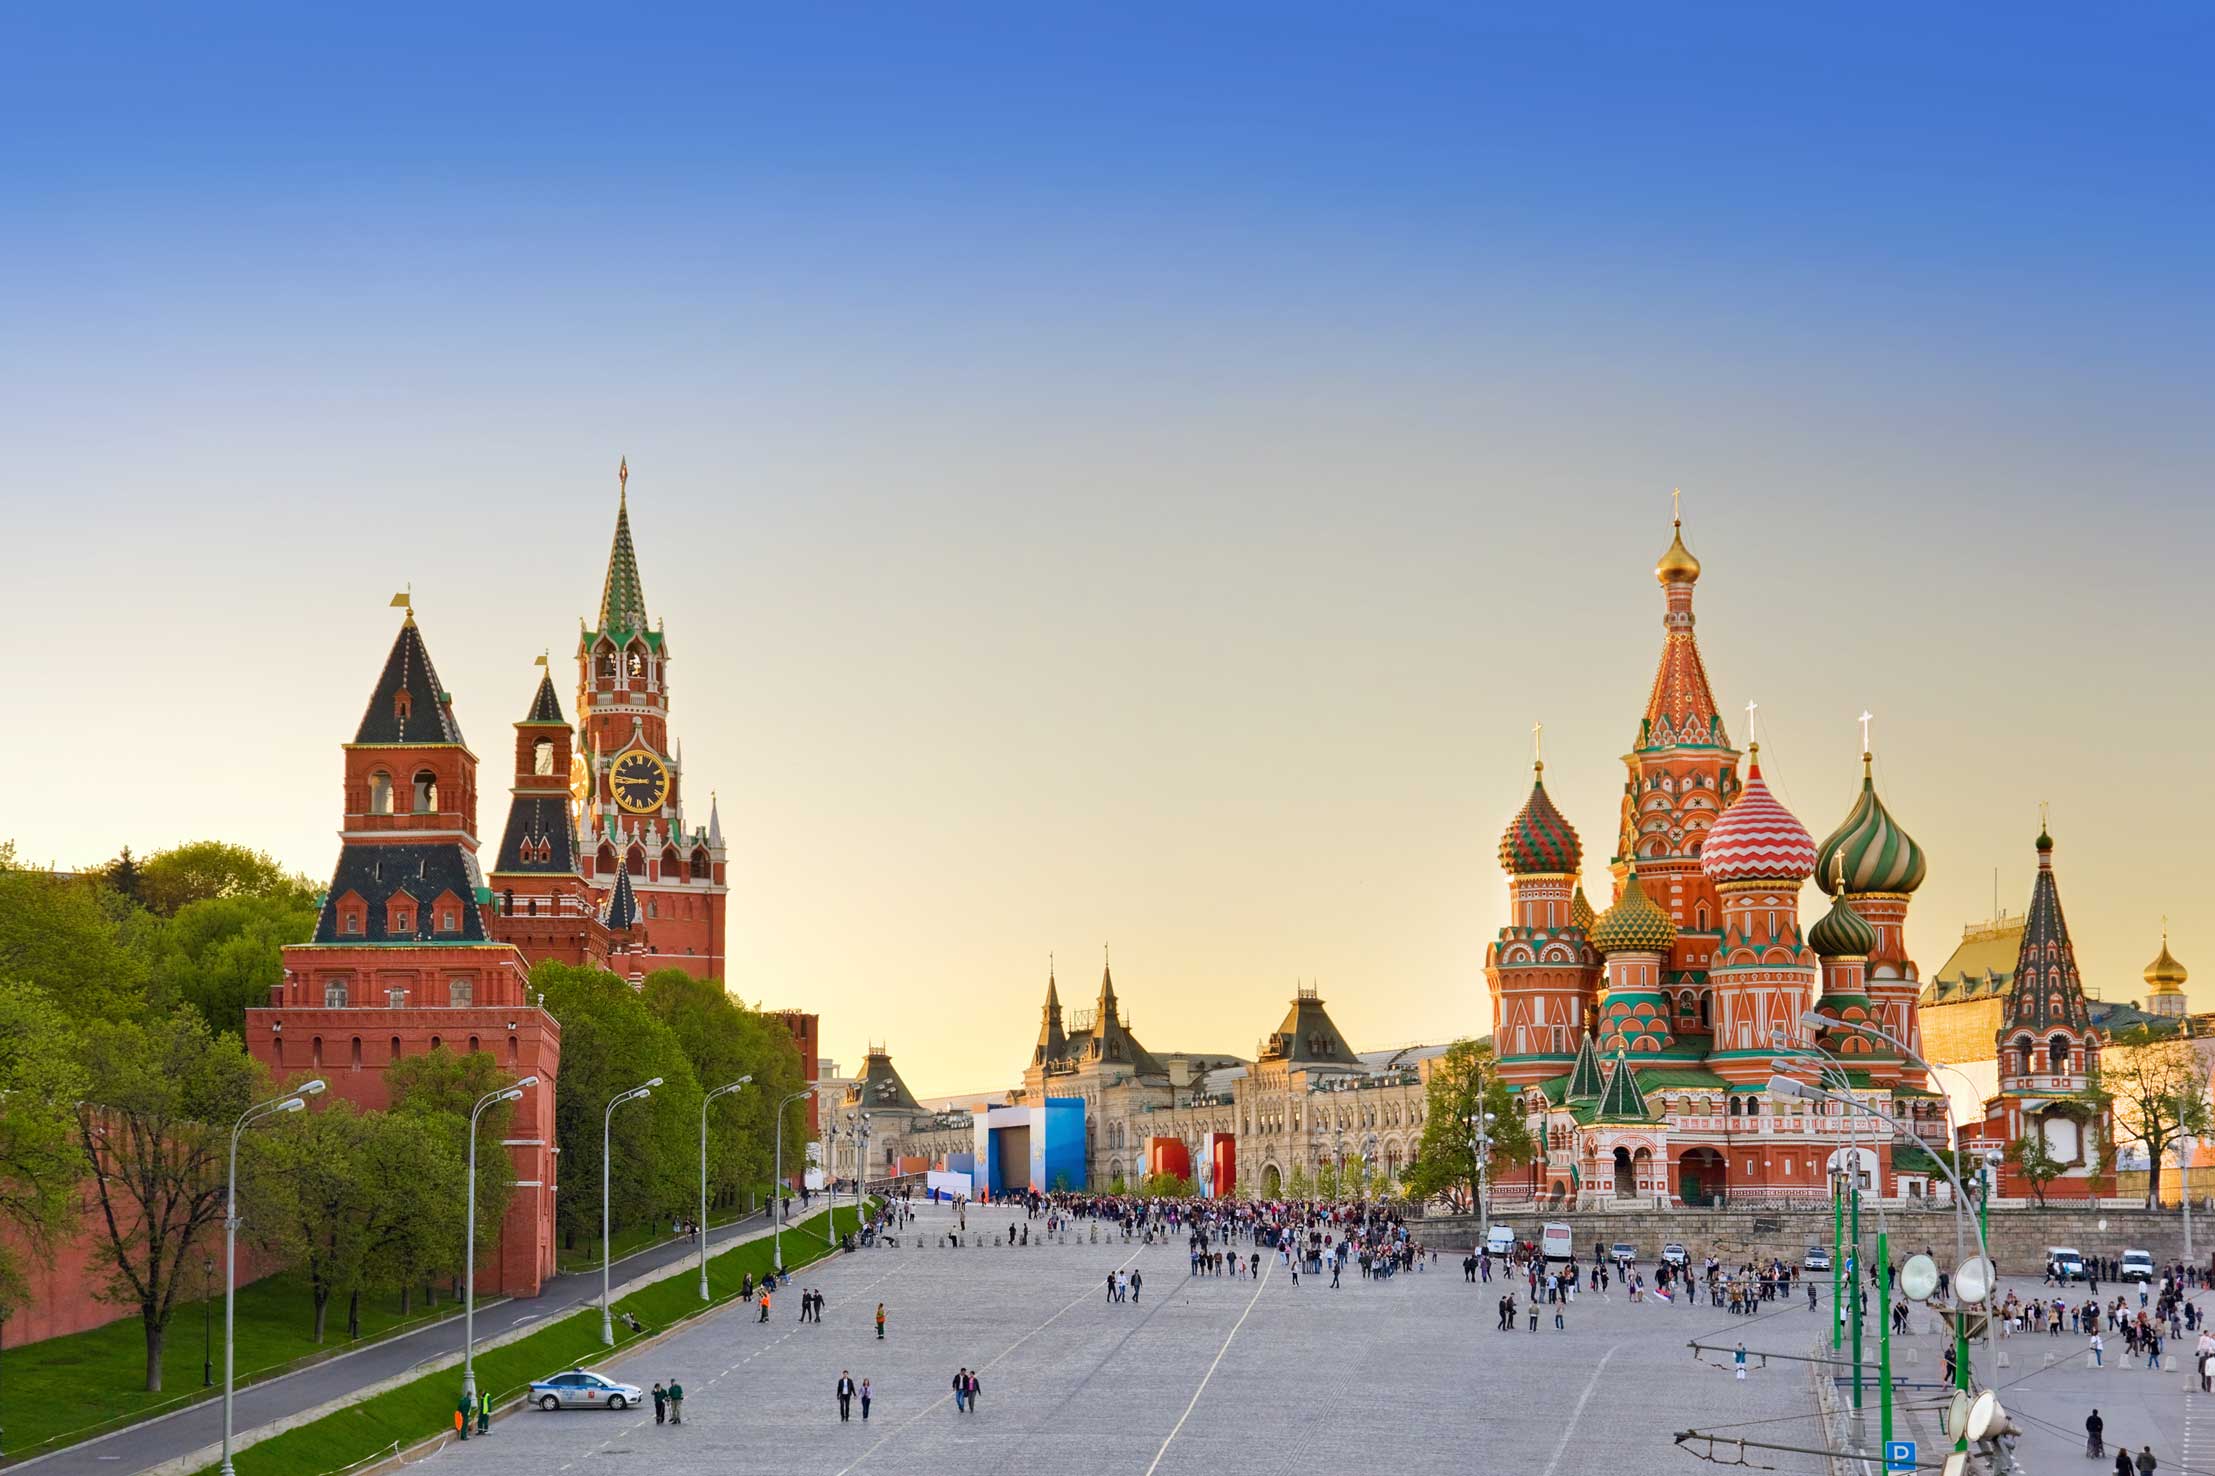 Most interesting facts about the Red Square in Moscow